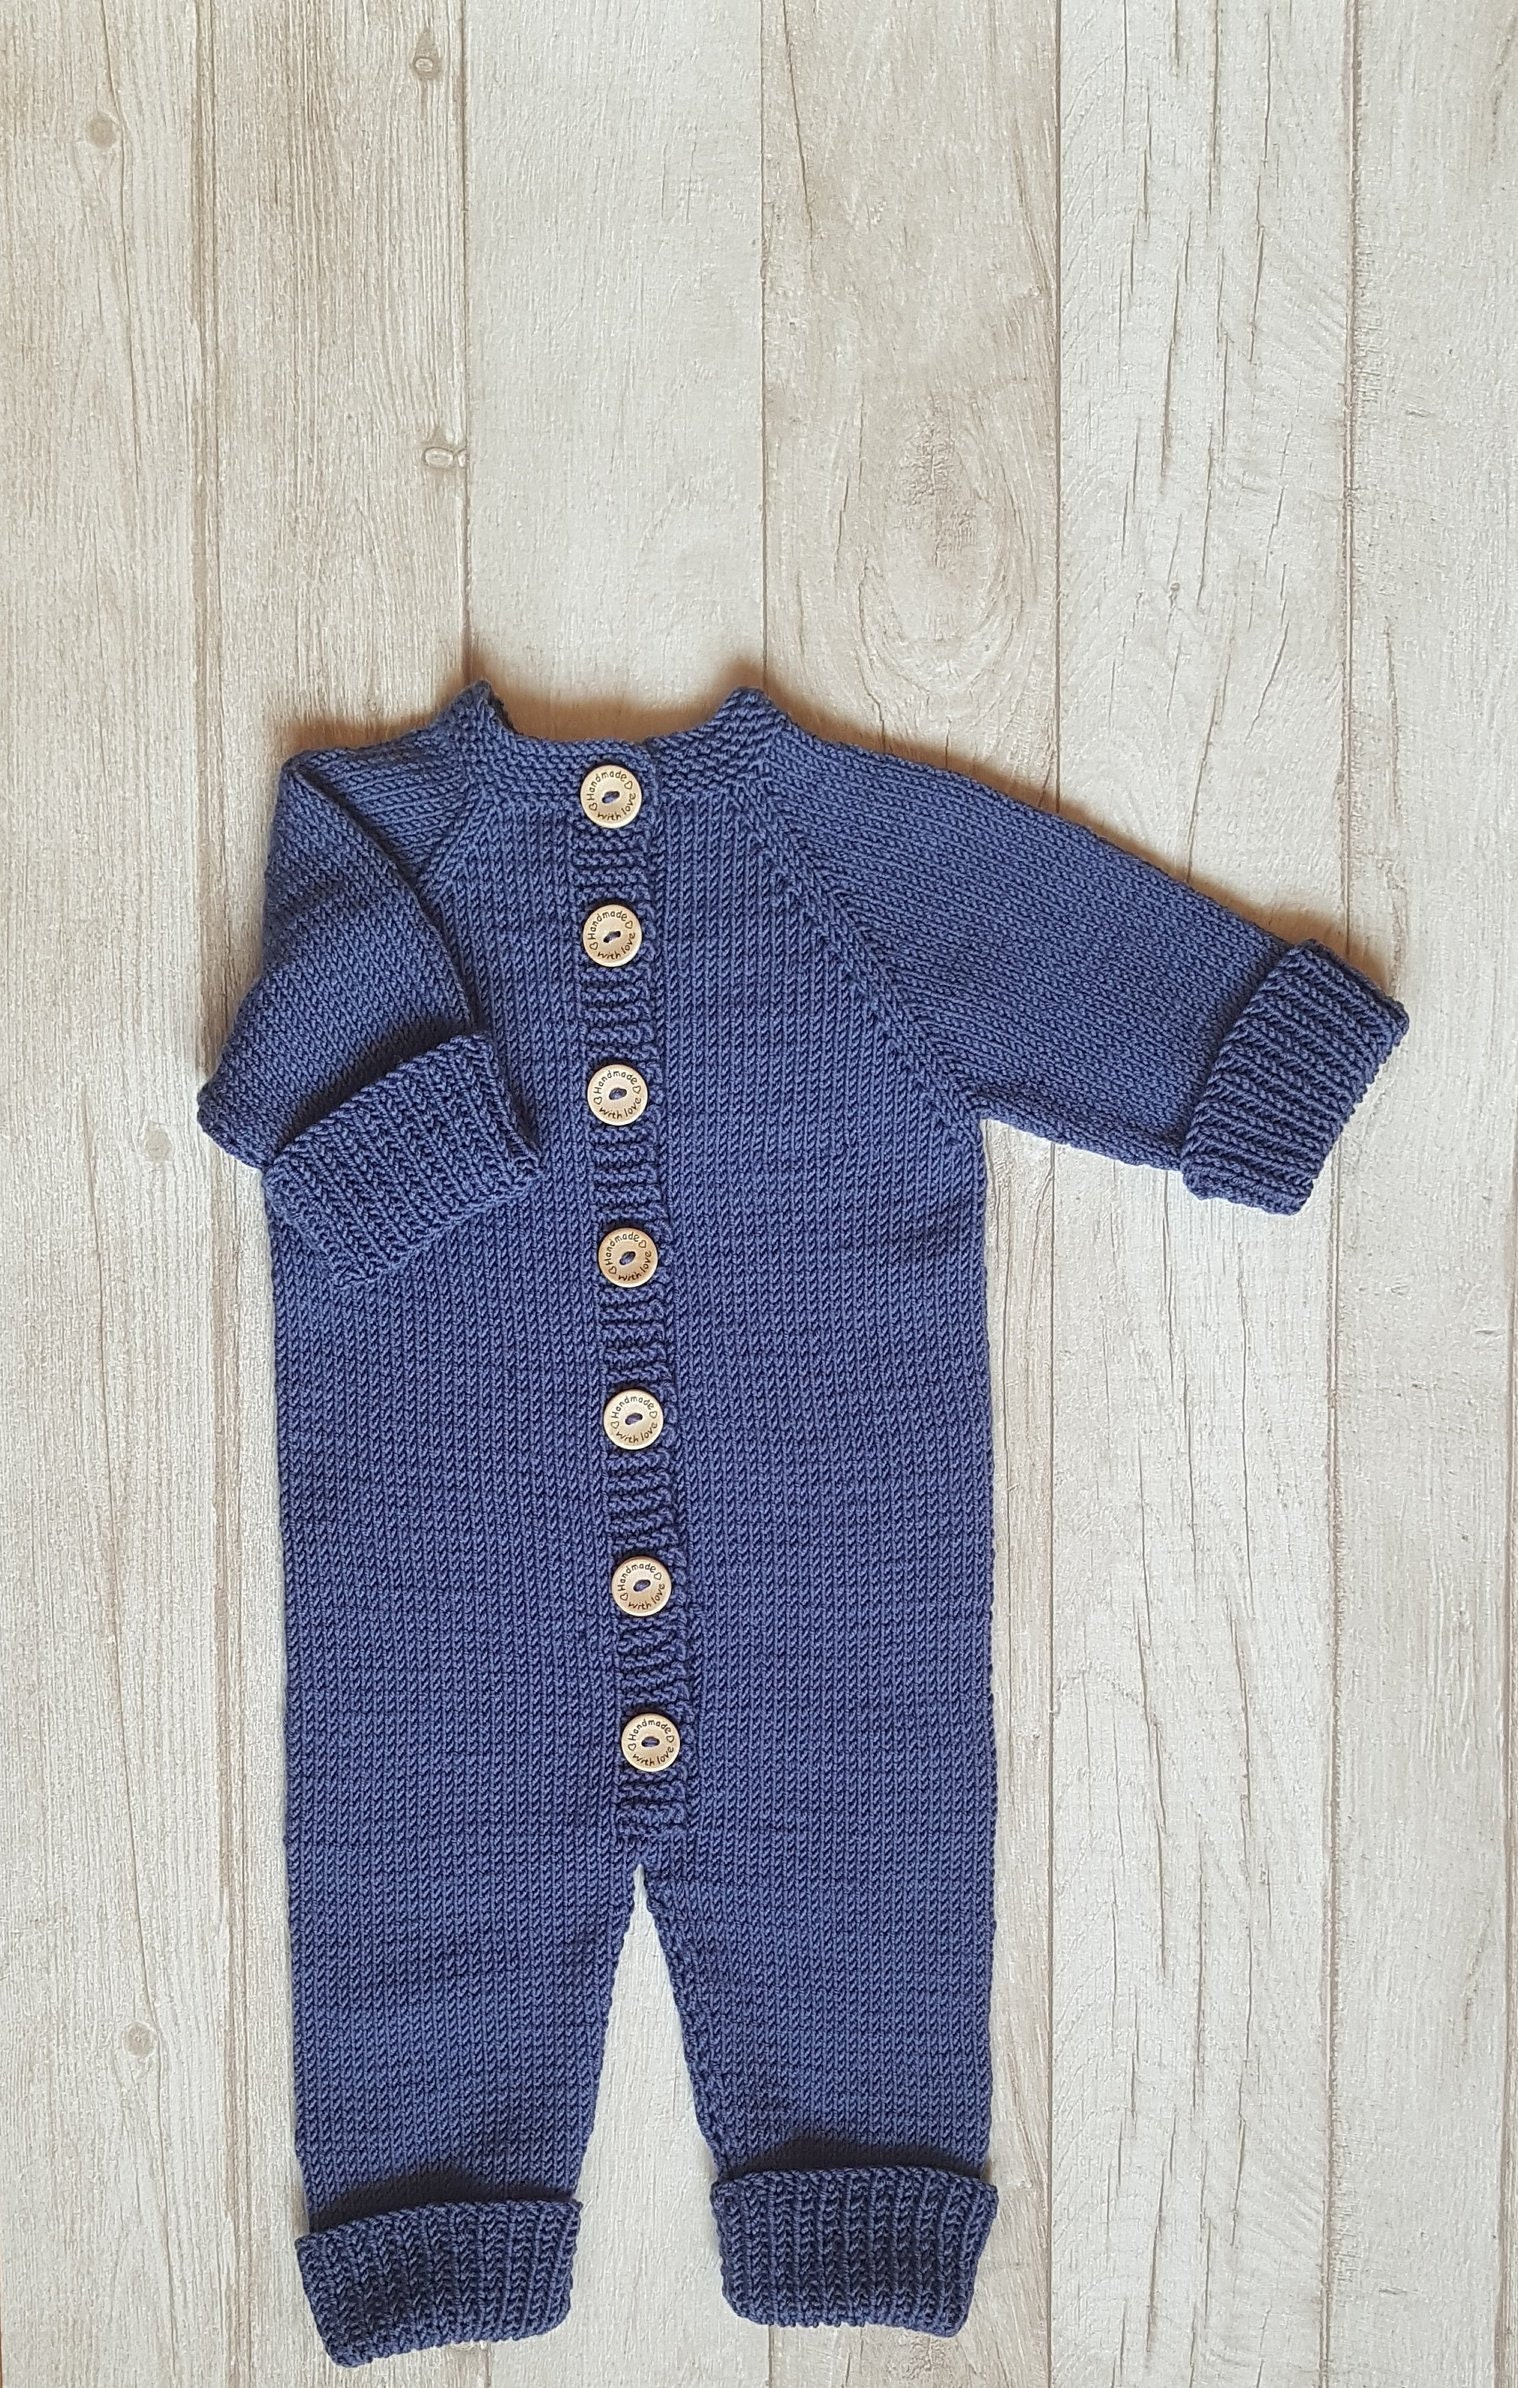 Baby Overalls Knit Knit Baby Romper Hand Knit Baby Overalls - Etsy